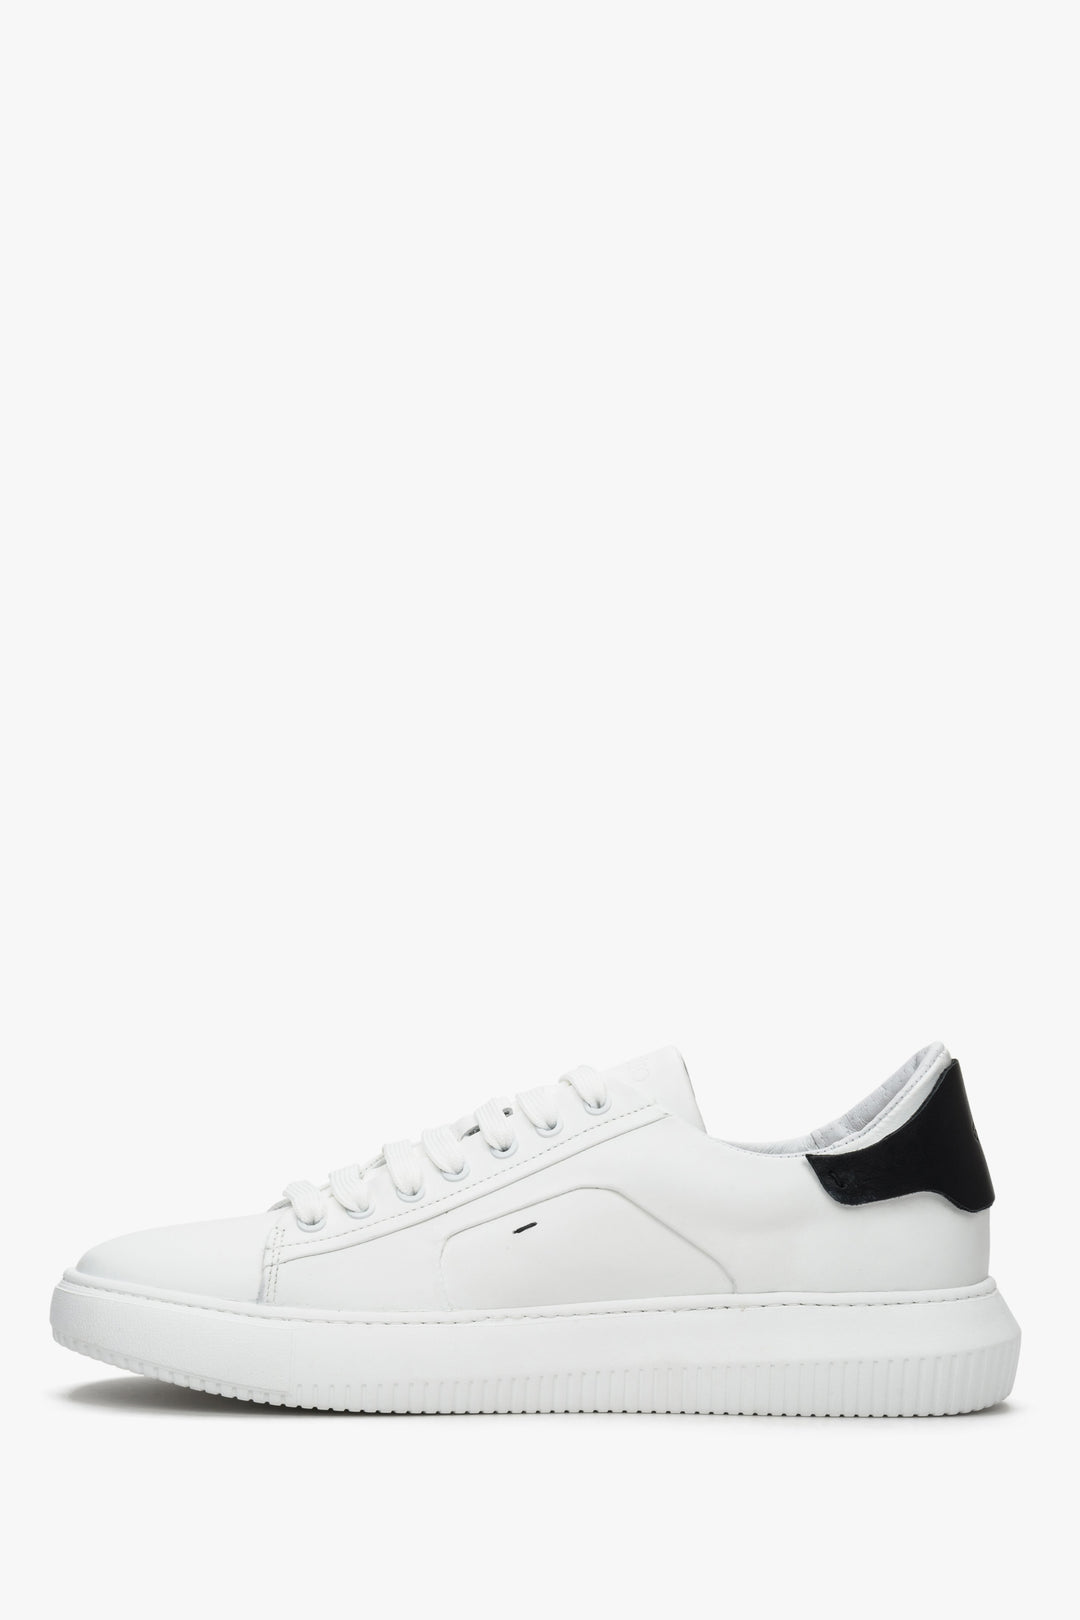 Comfy men's sneakers in black and white made of natural leather on a rubber sole.